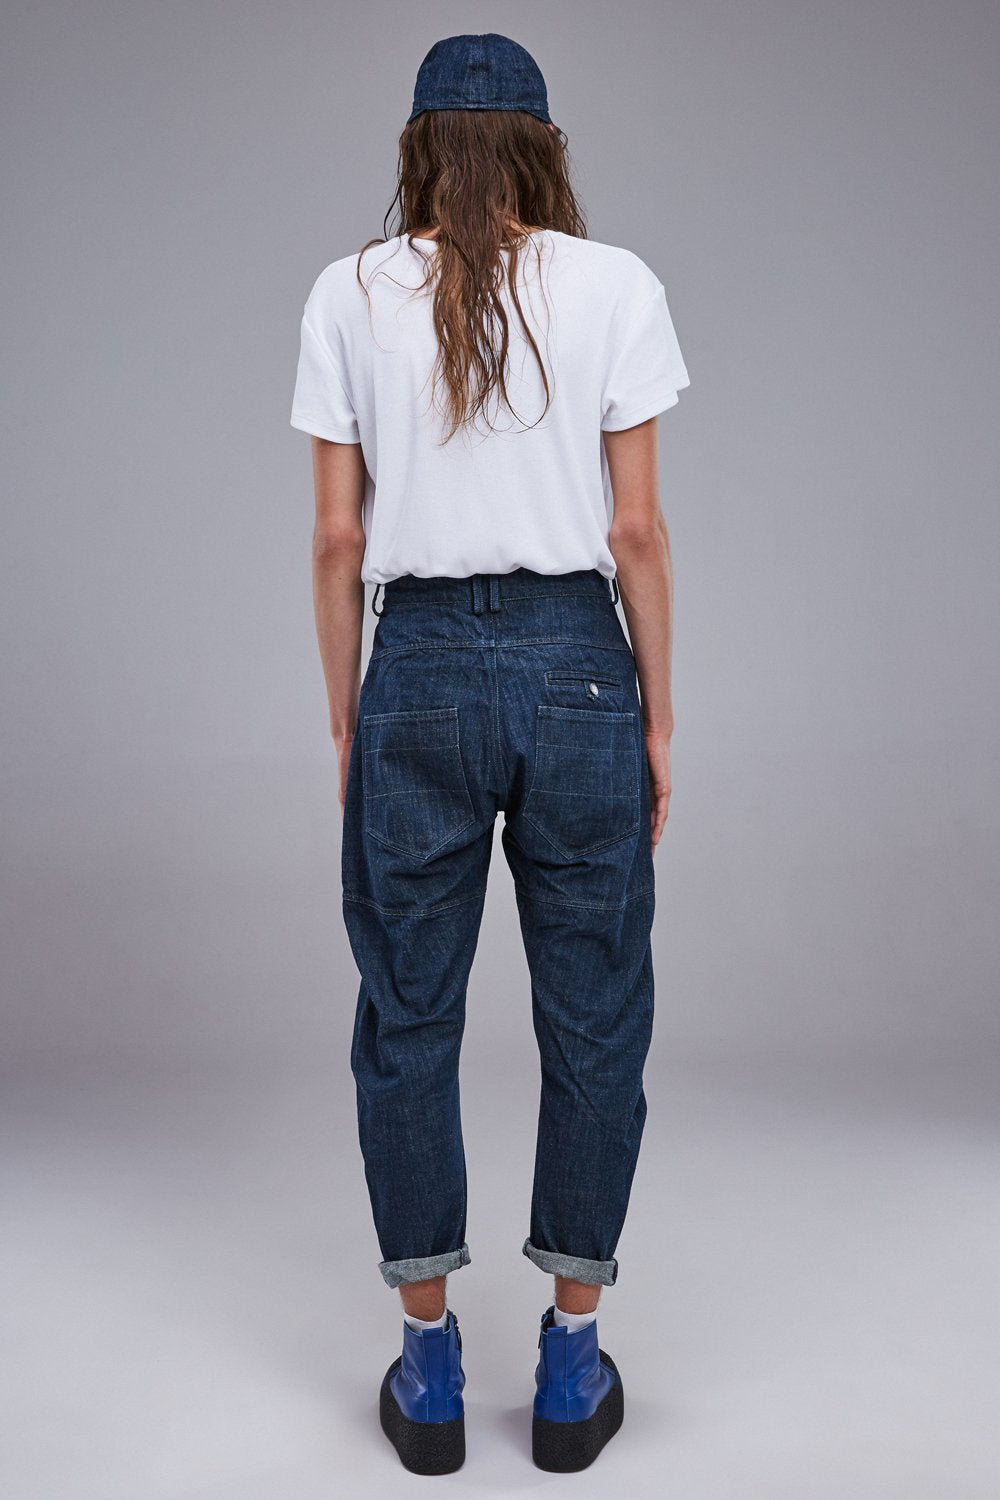 unisex jeans AT HOME